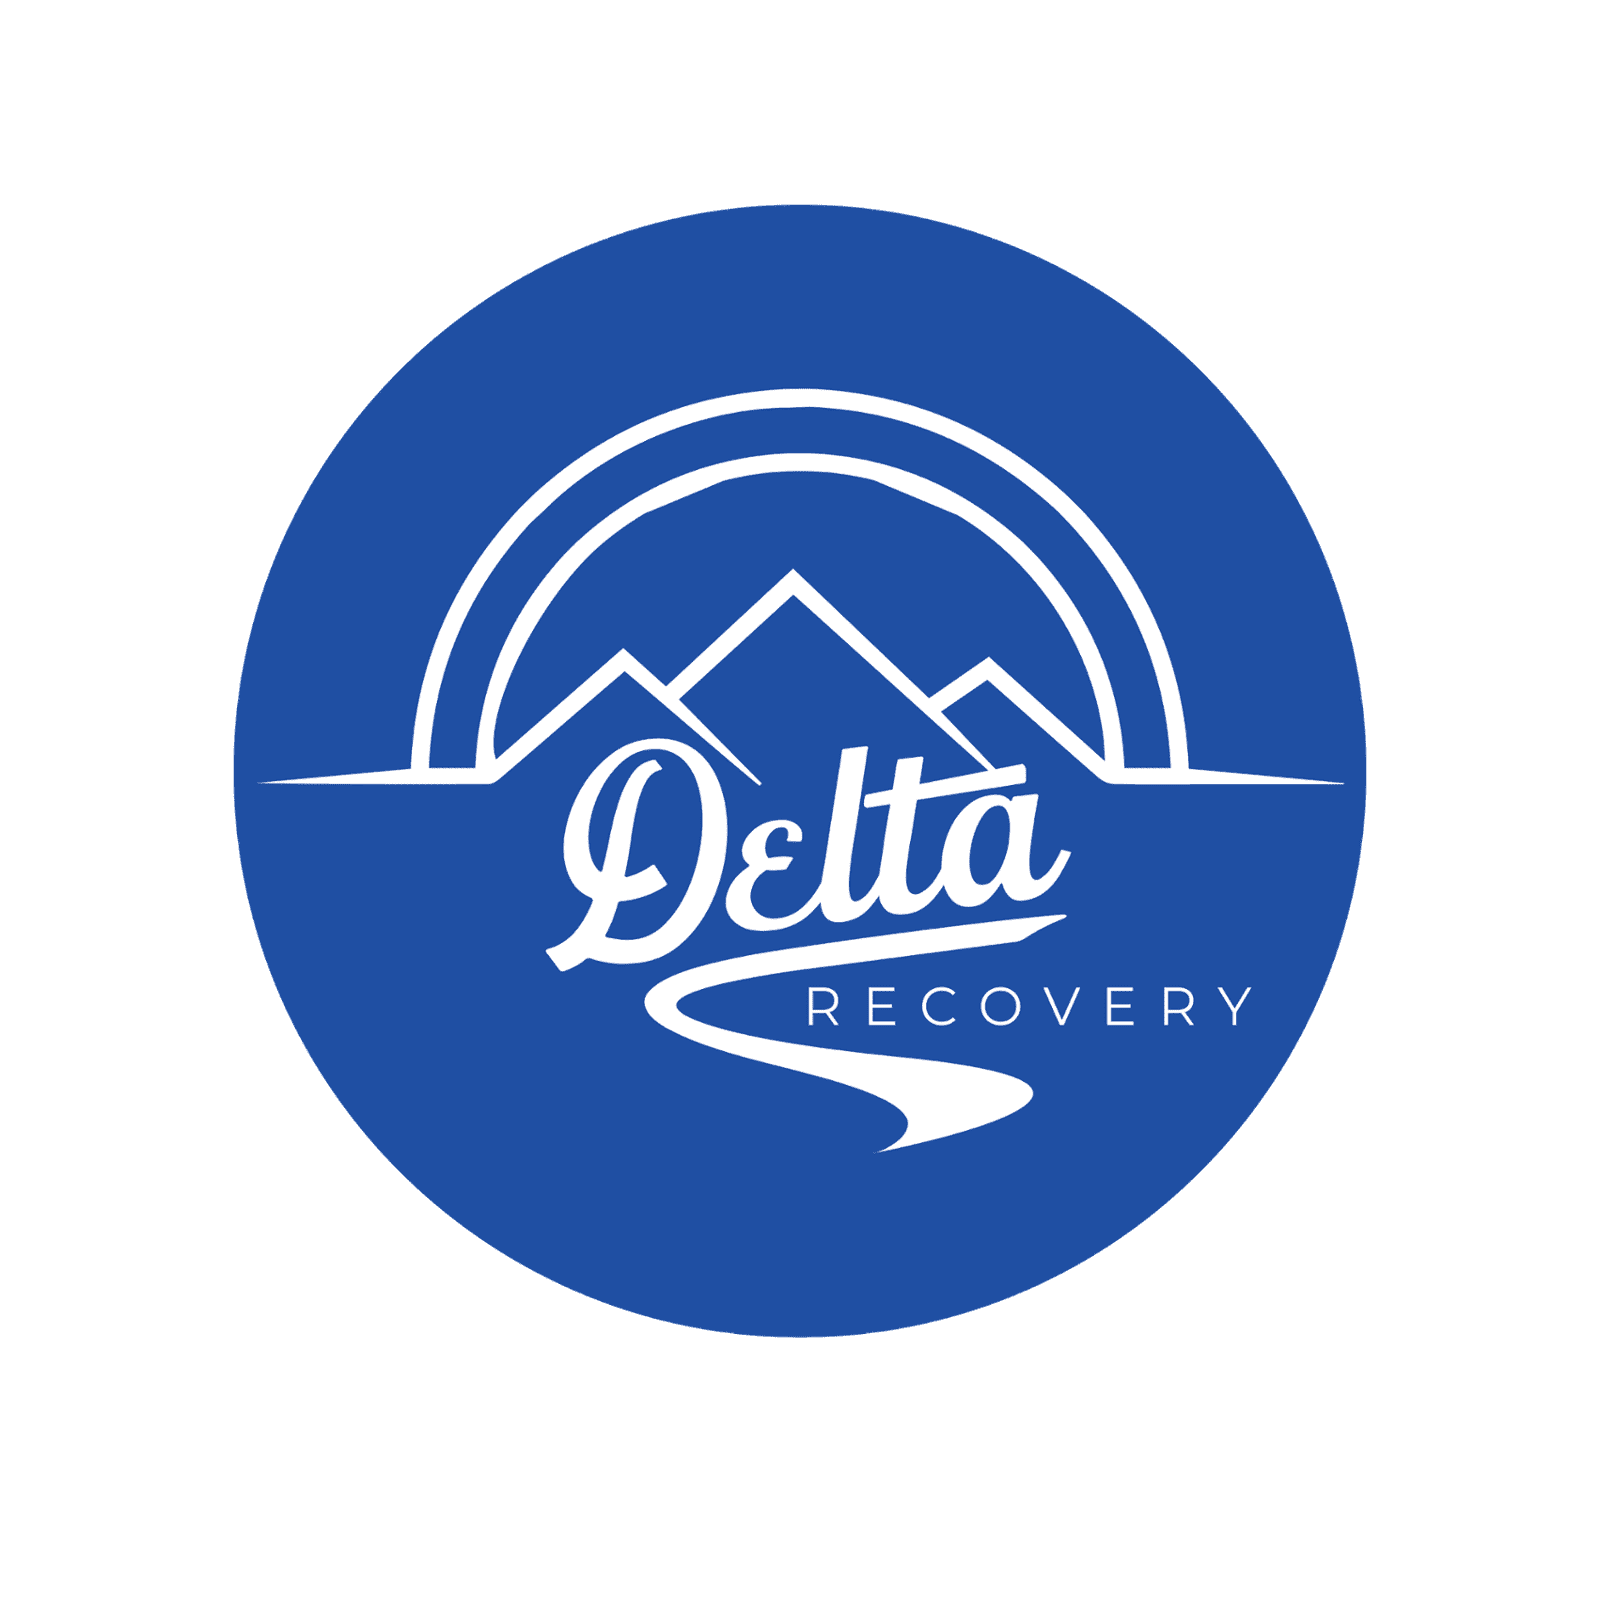 Case Study - Delta Recovery Solutions, A Nonprofit Organization, Empowering Lives through Zoho One